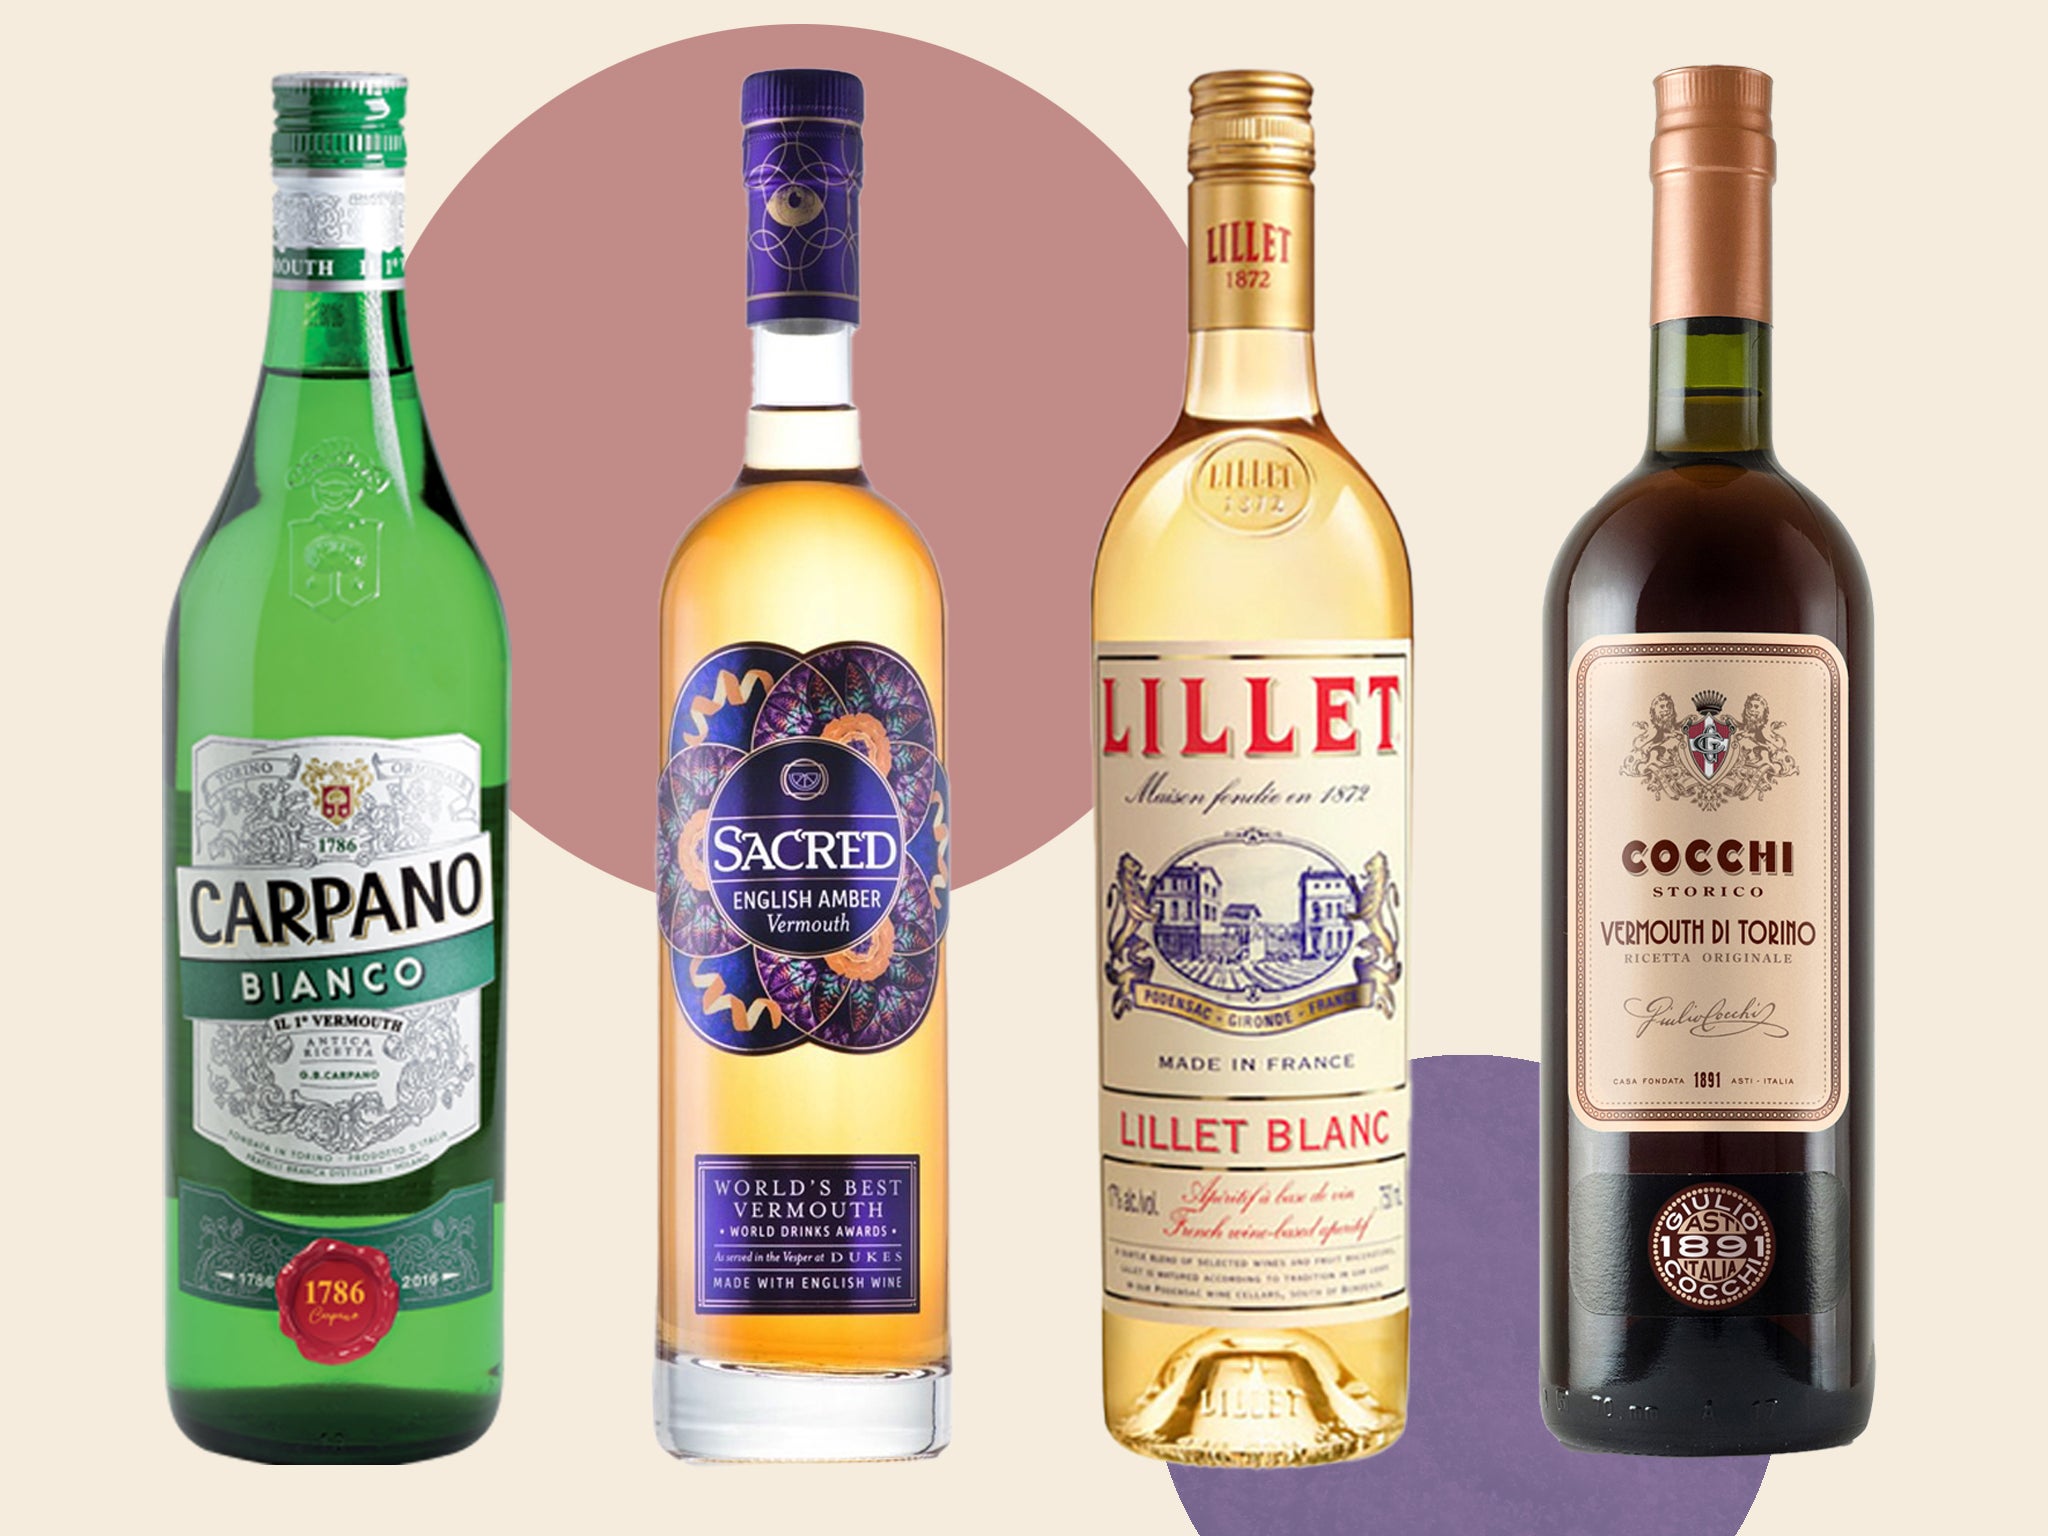 From the home turf and abroad, these are the tipples we recommend